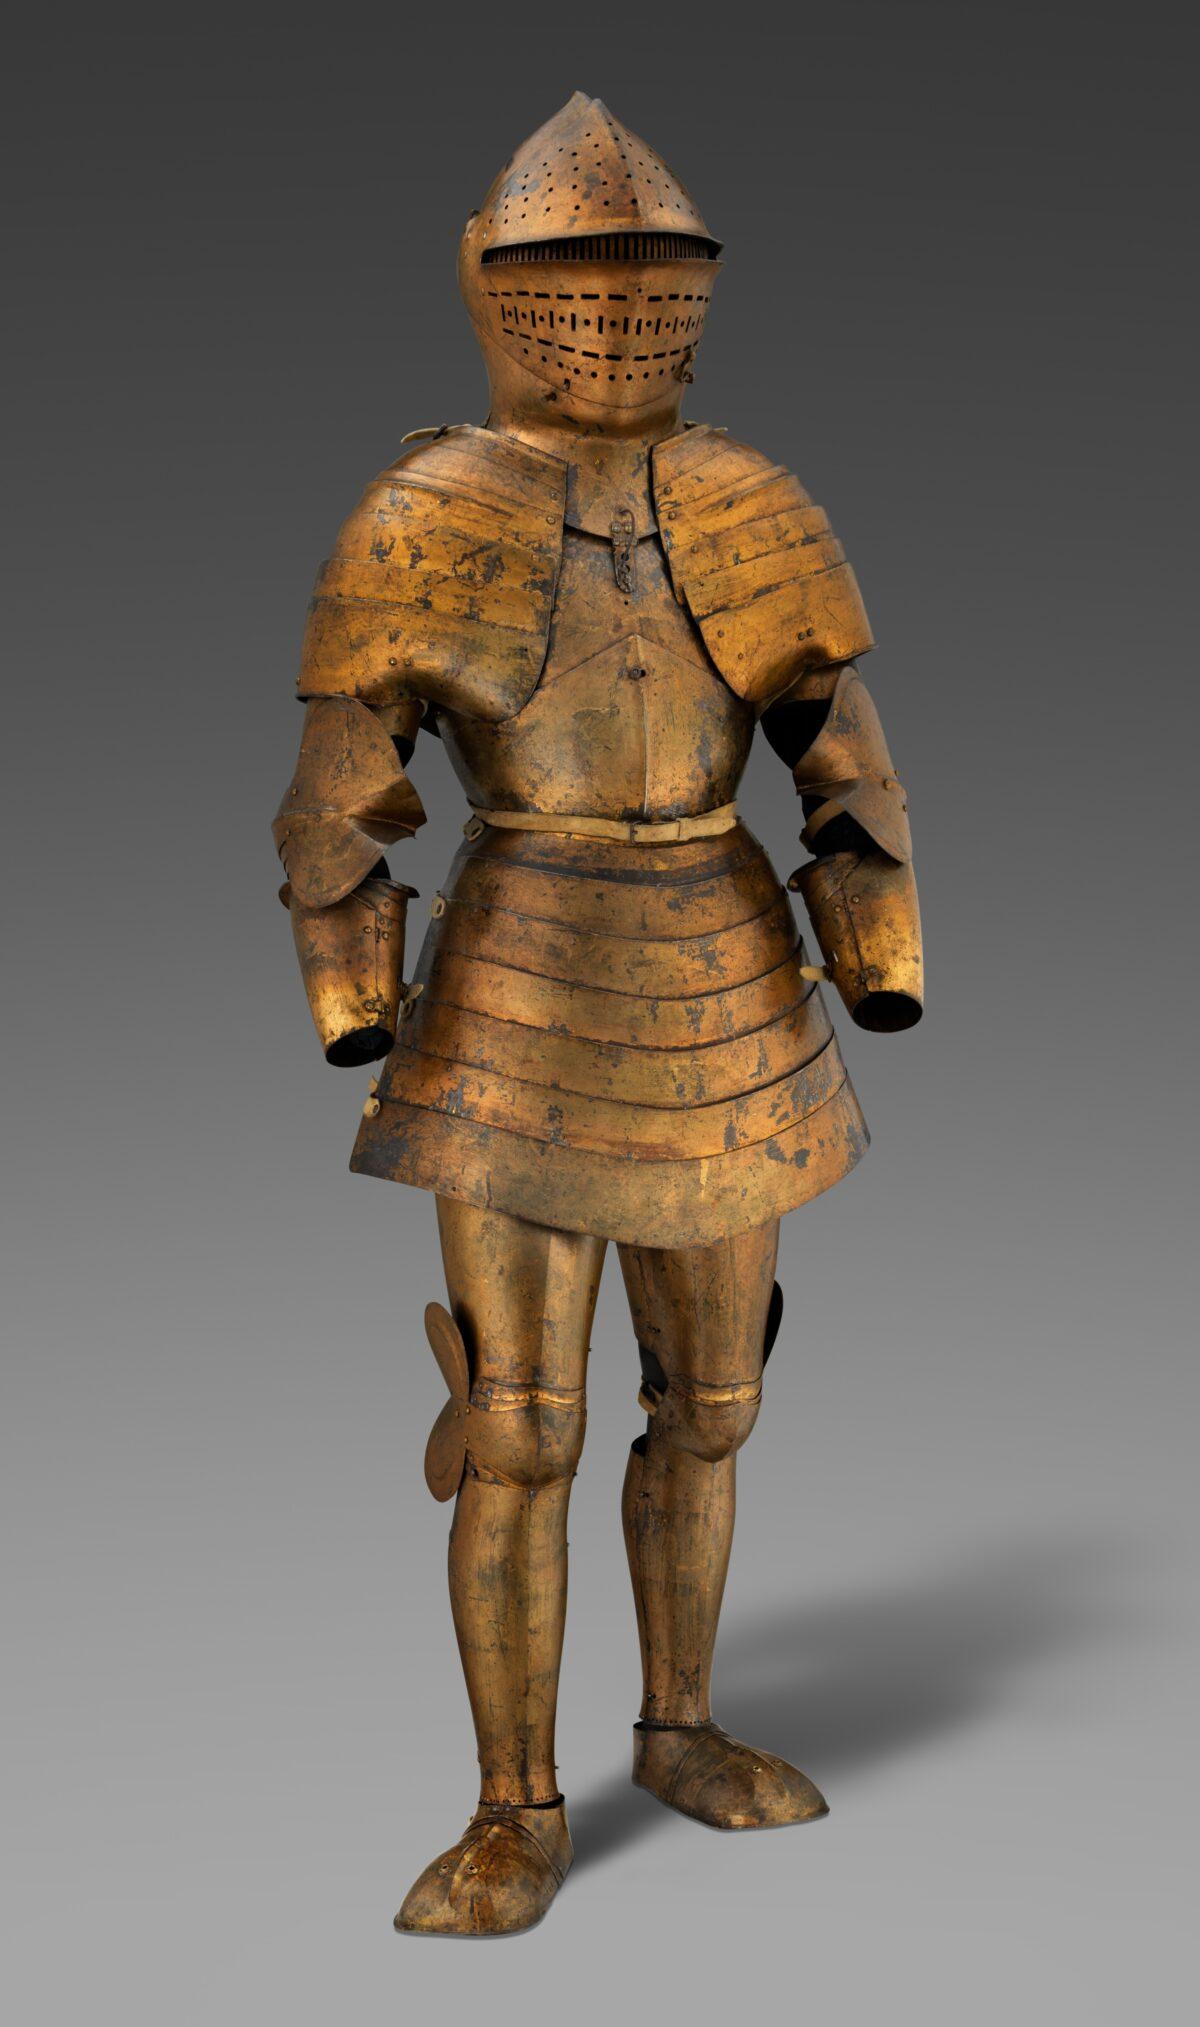 Foot combat armor of Maximilian I, before 1508, by Francesco da Merate of Burgundy (Arbois). Steel, copper alloy, leather, and gold pigments. Kunsthistorisches Museum, Vienna, Imperial Armoury (B 71). (Bruce M. White / The Metropolitan Museum of Art)